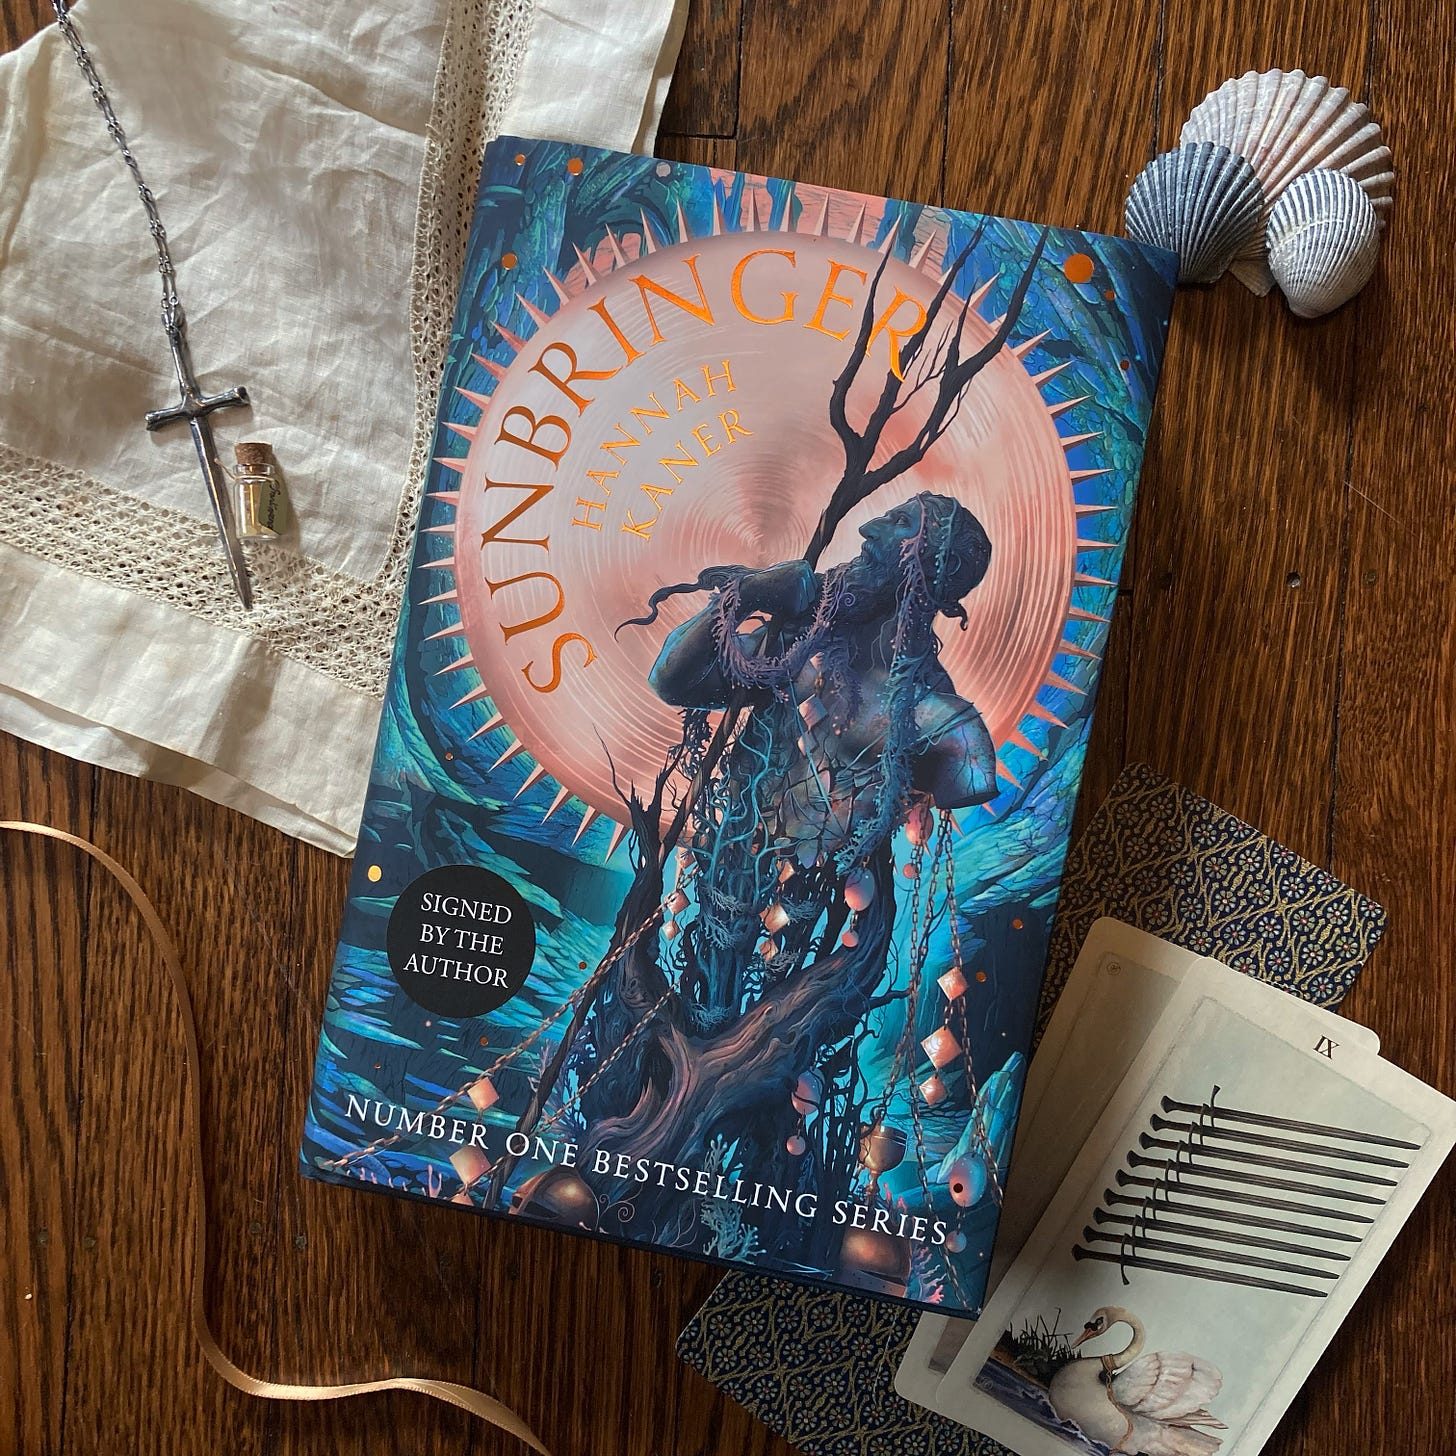 hardcover copy of Sunbringer in a flat lay featuring tarot cards, a golden ribbon, a sword necklace, vintage cream handkerchief, and shells